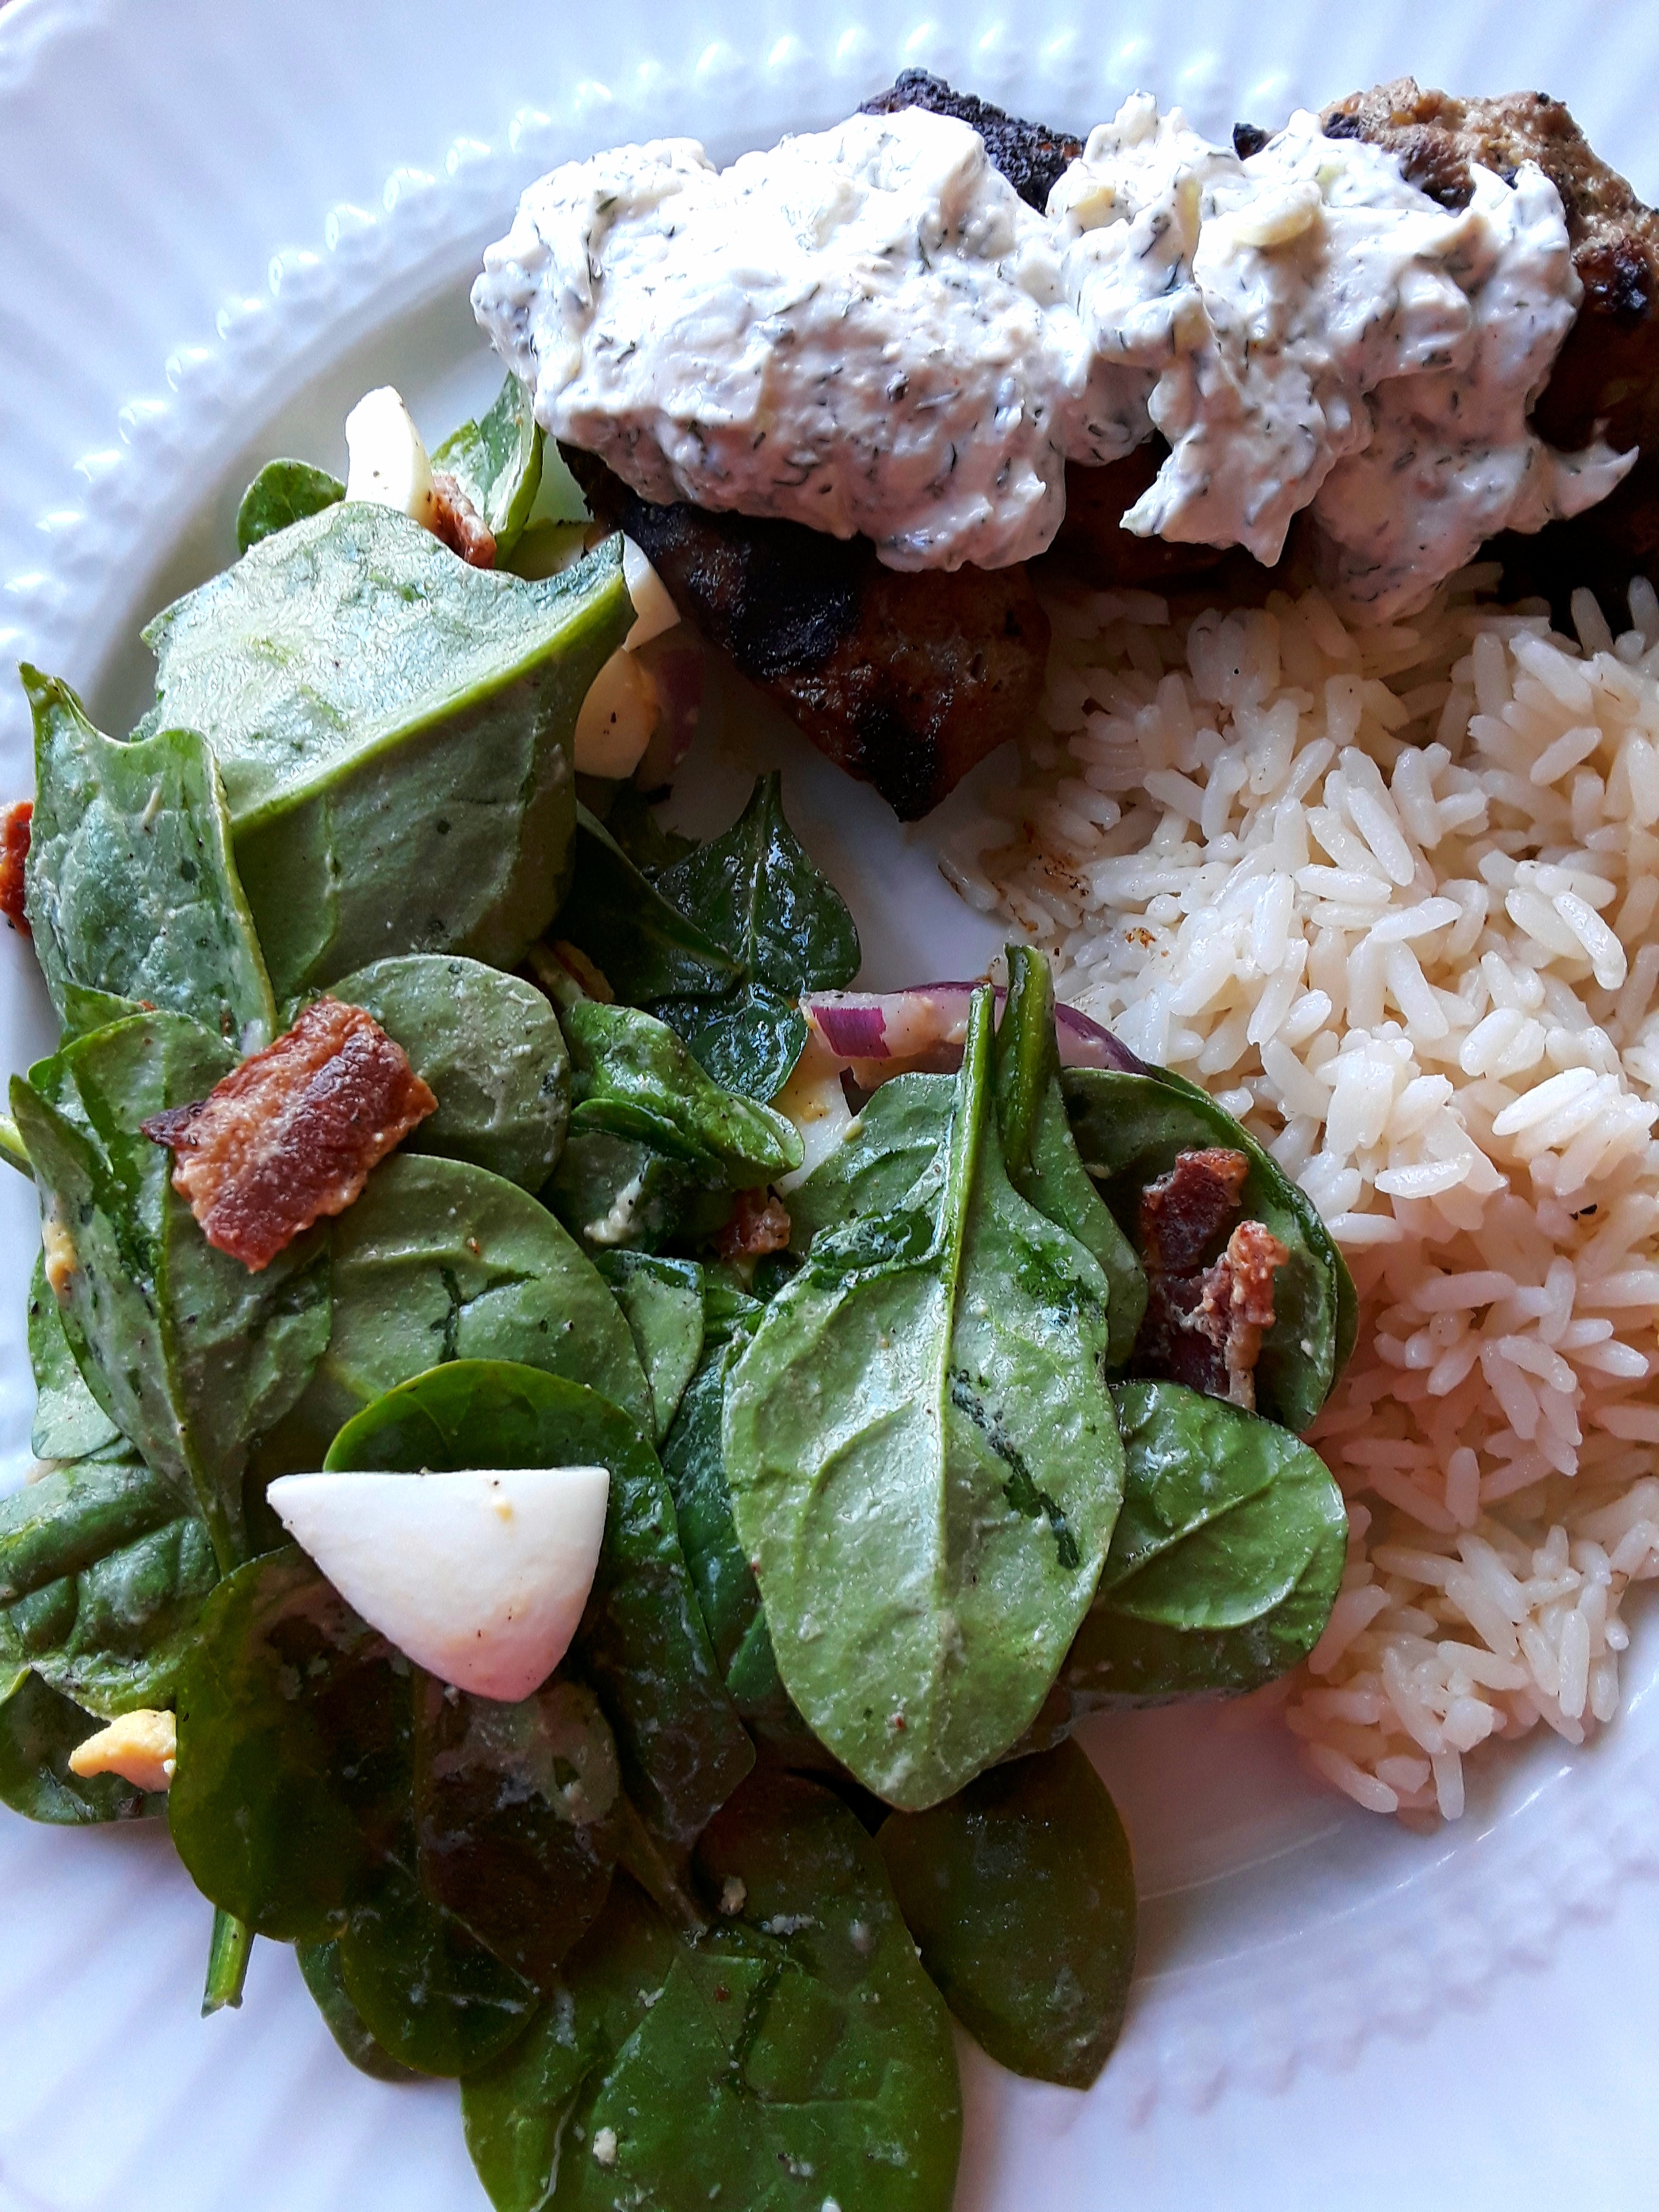 Lamb keftedes served with rice and spinach salad